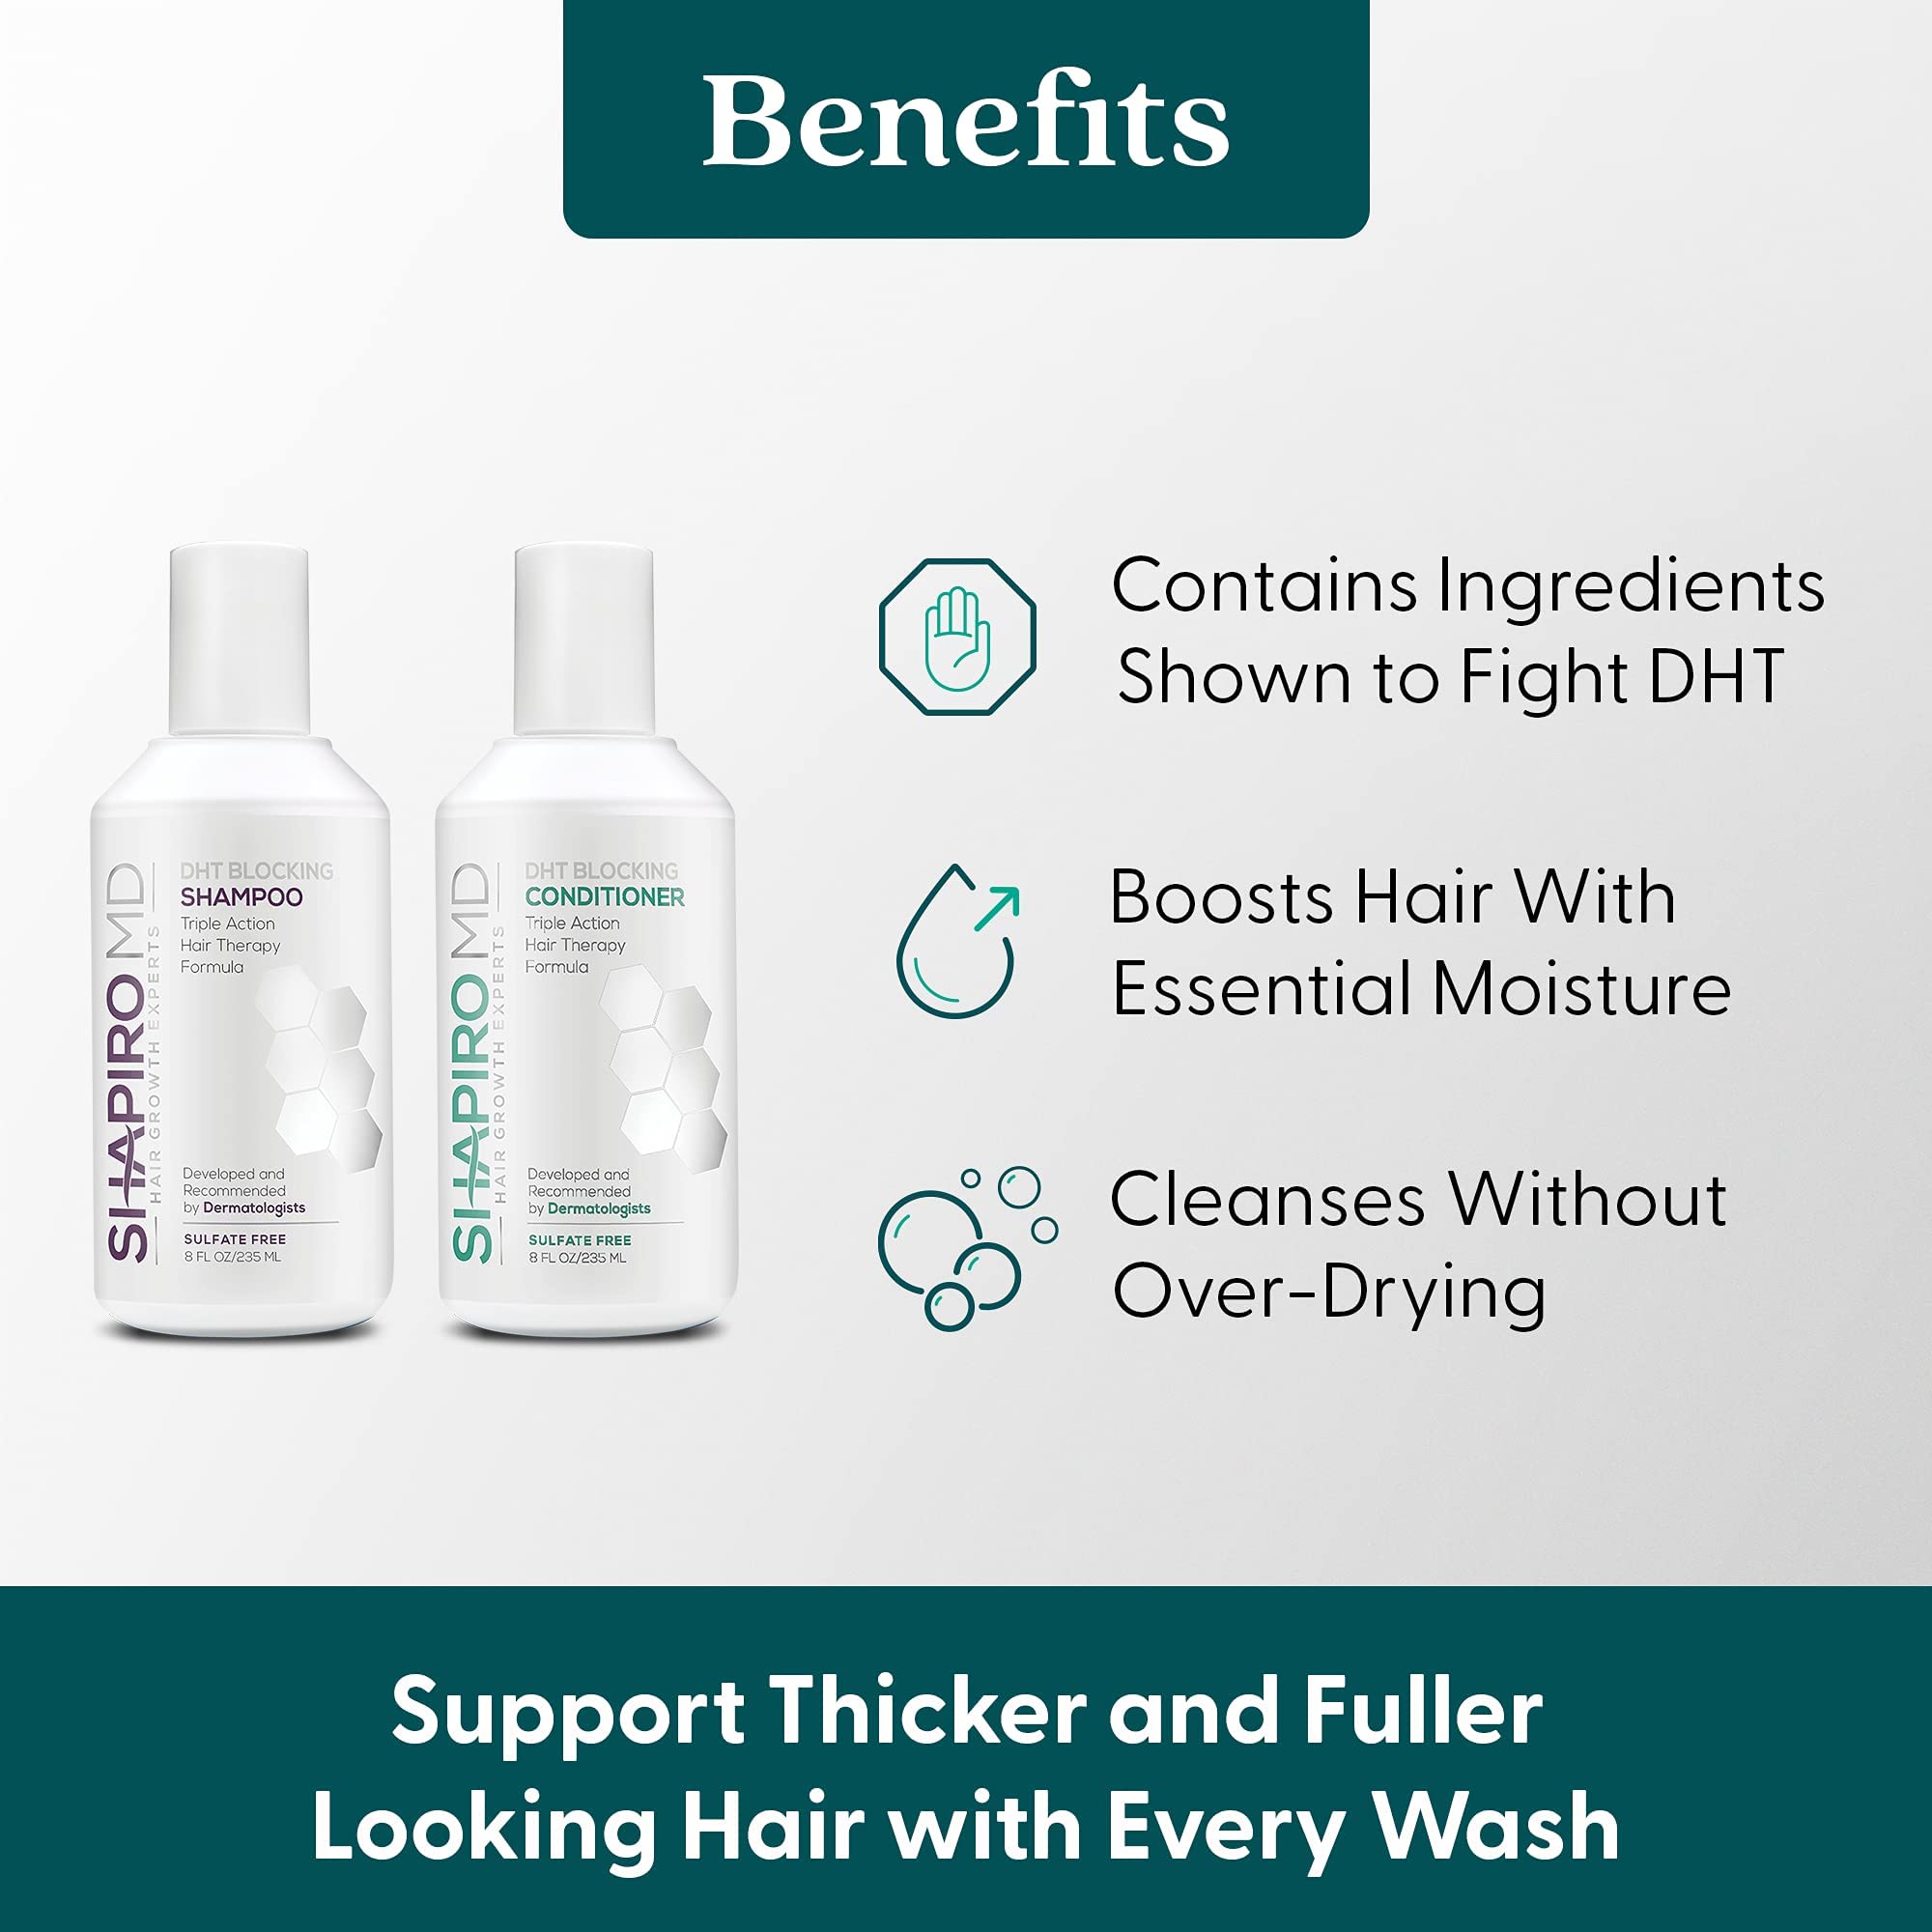 Hair Loss Shampoo, Conditioner, and Hairbiotic | Experience Healthier, Fuller, and Thicker Looking Hair | Hair Loss Solution Developed by Dermatologists | 1 Month Supply